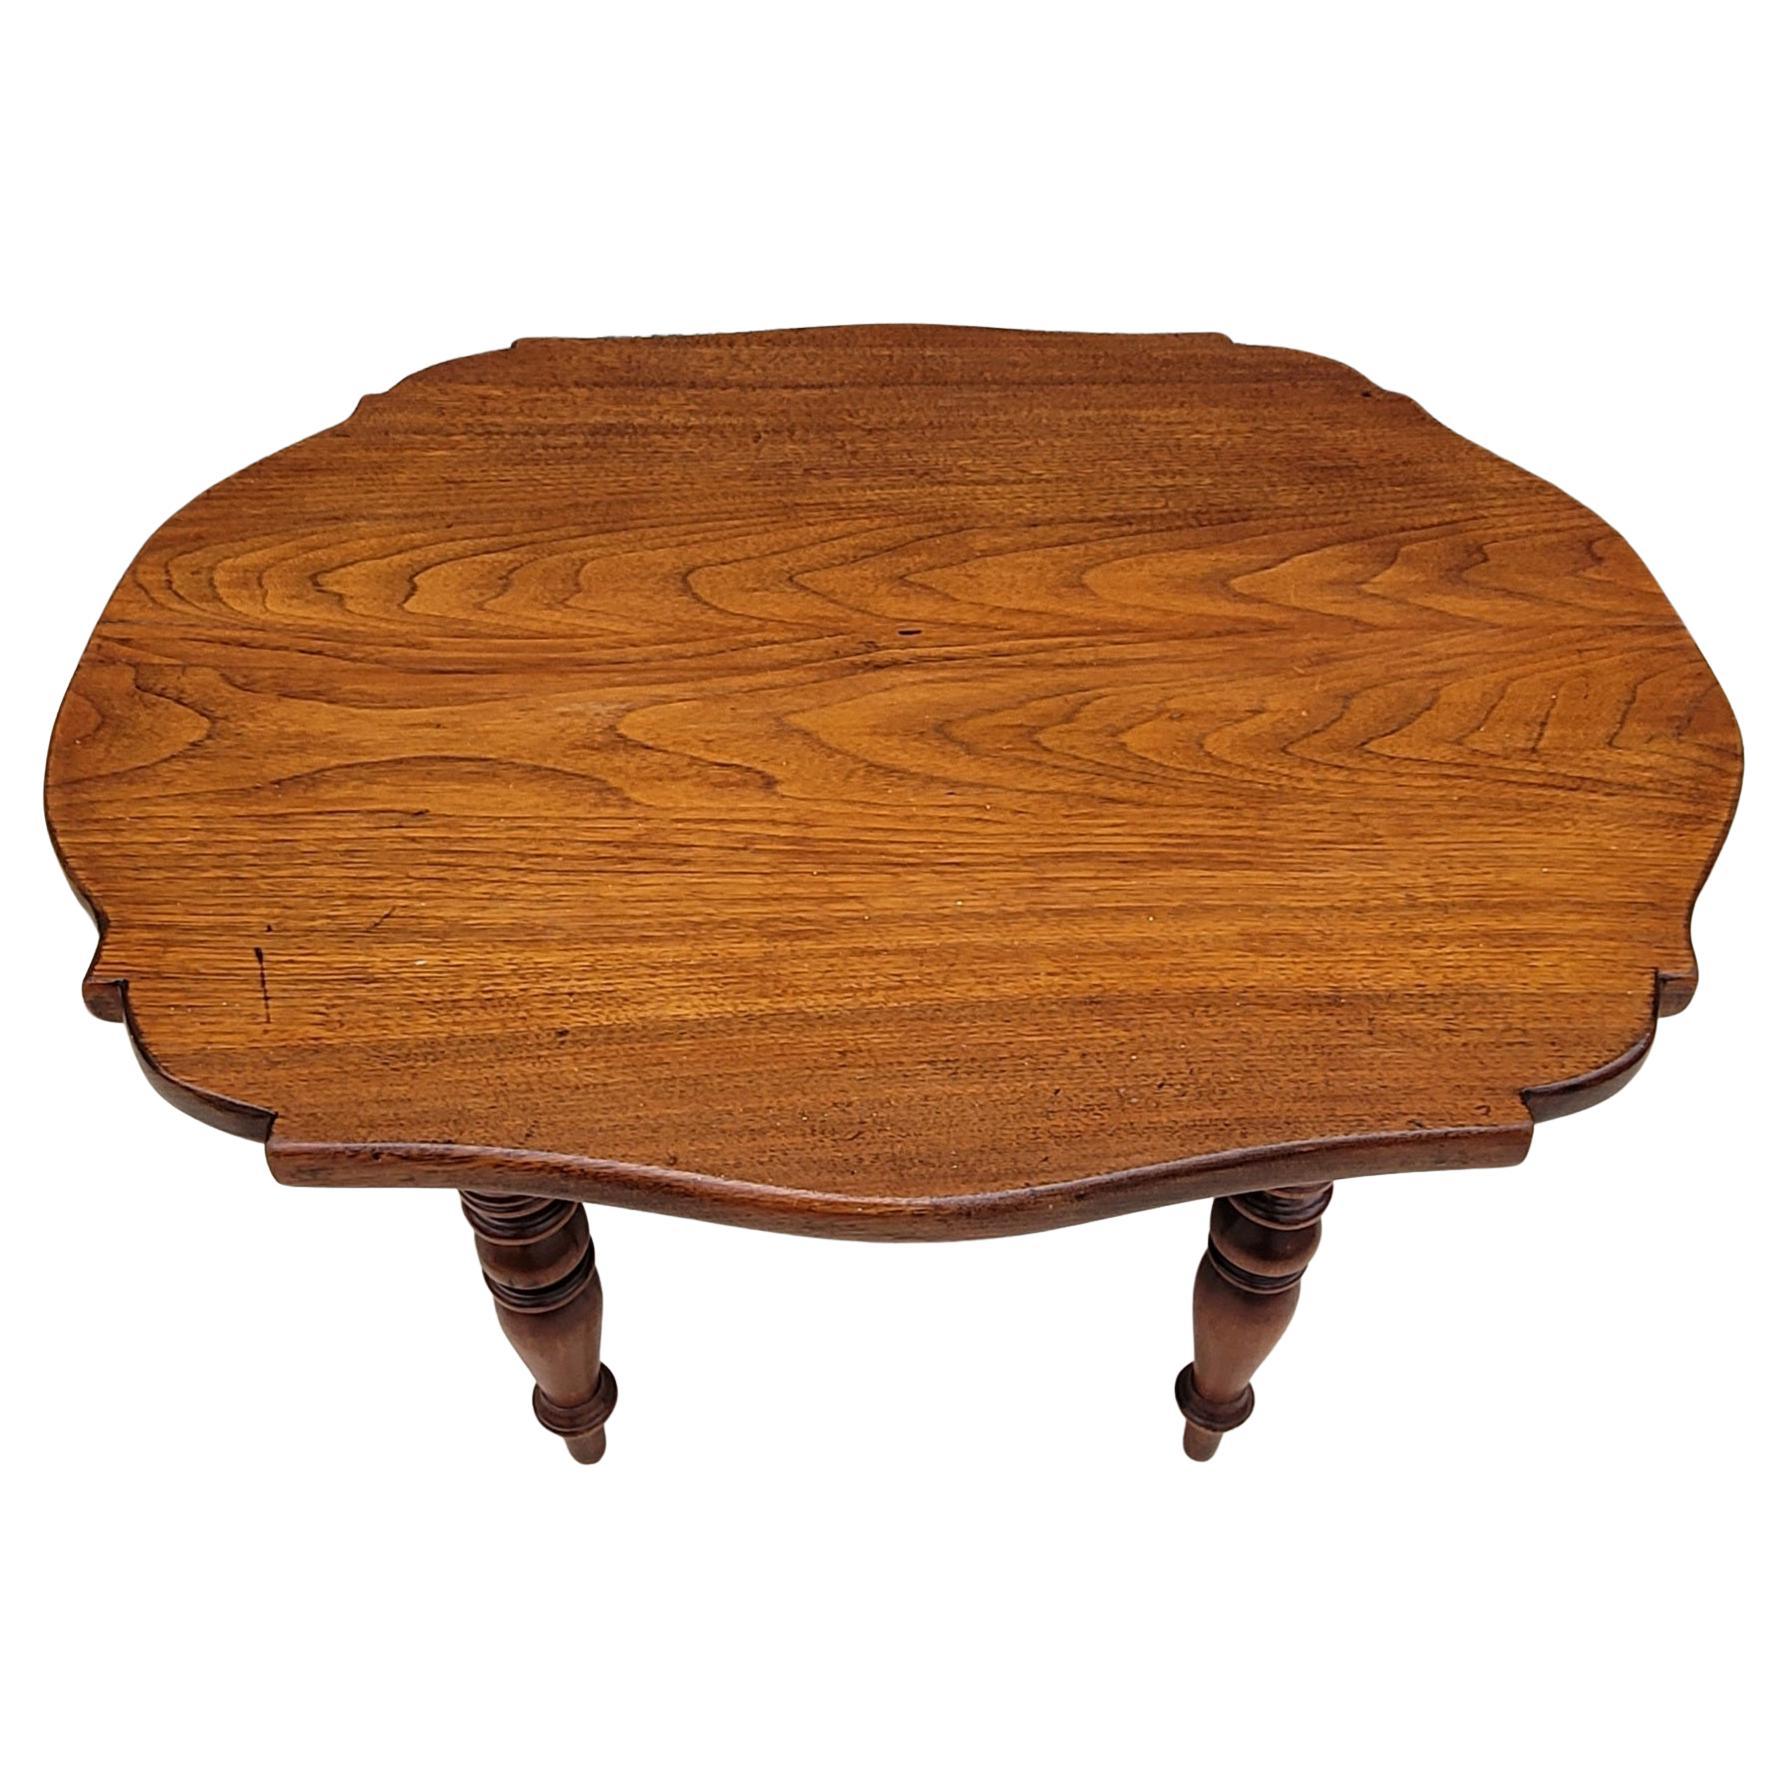 American Mid-Century Federal Turned Legs Mahogany Low Side Table Tea Table For Sale